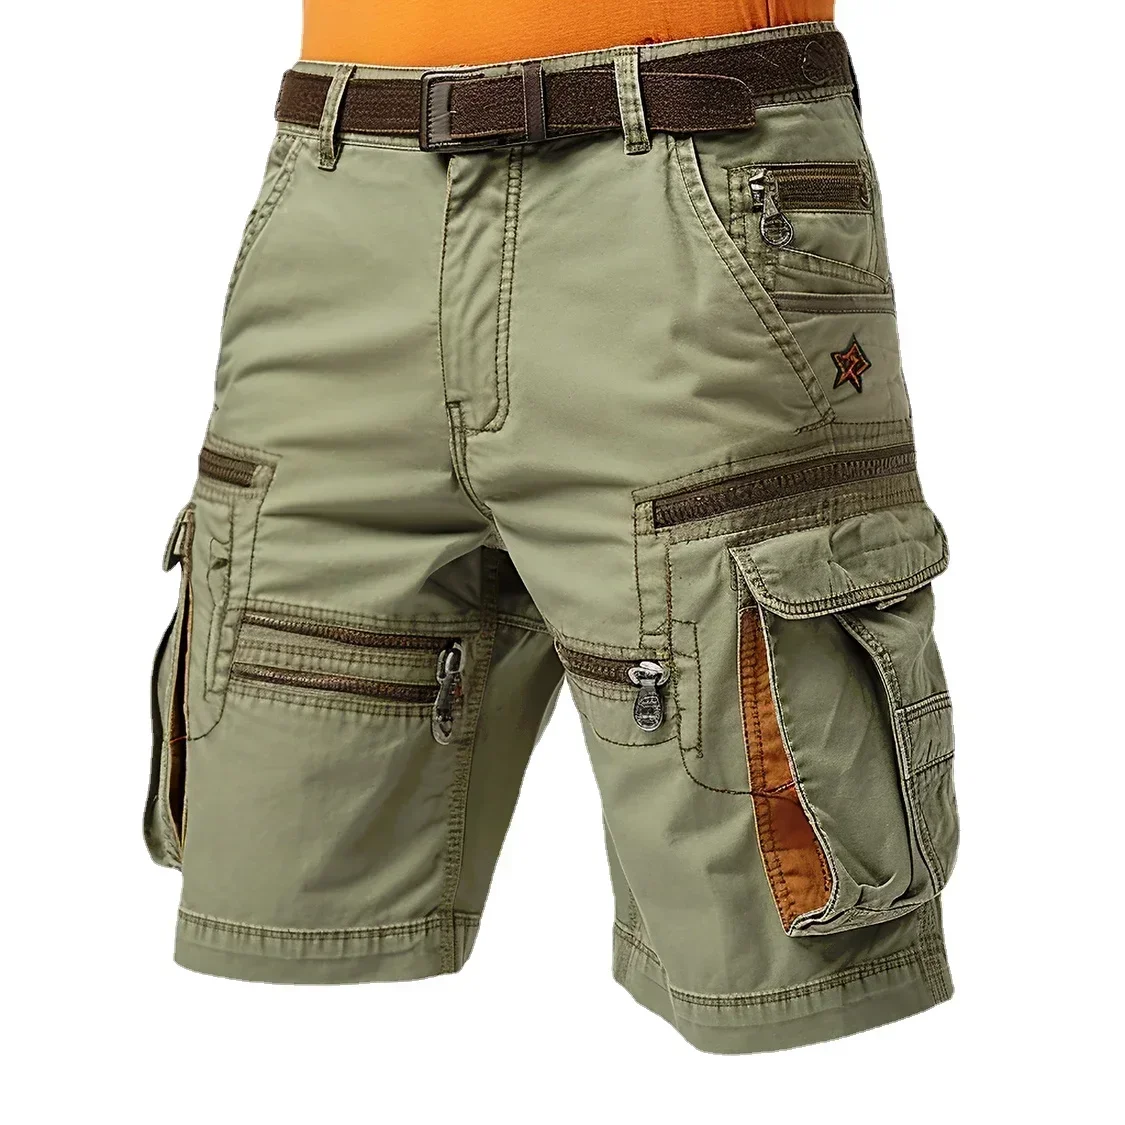 

Man Cargo Shorts Stretch Washed Vintage Have Belted and Pockets